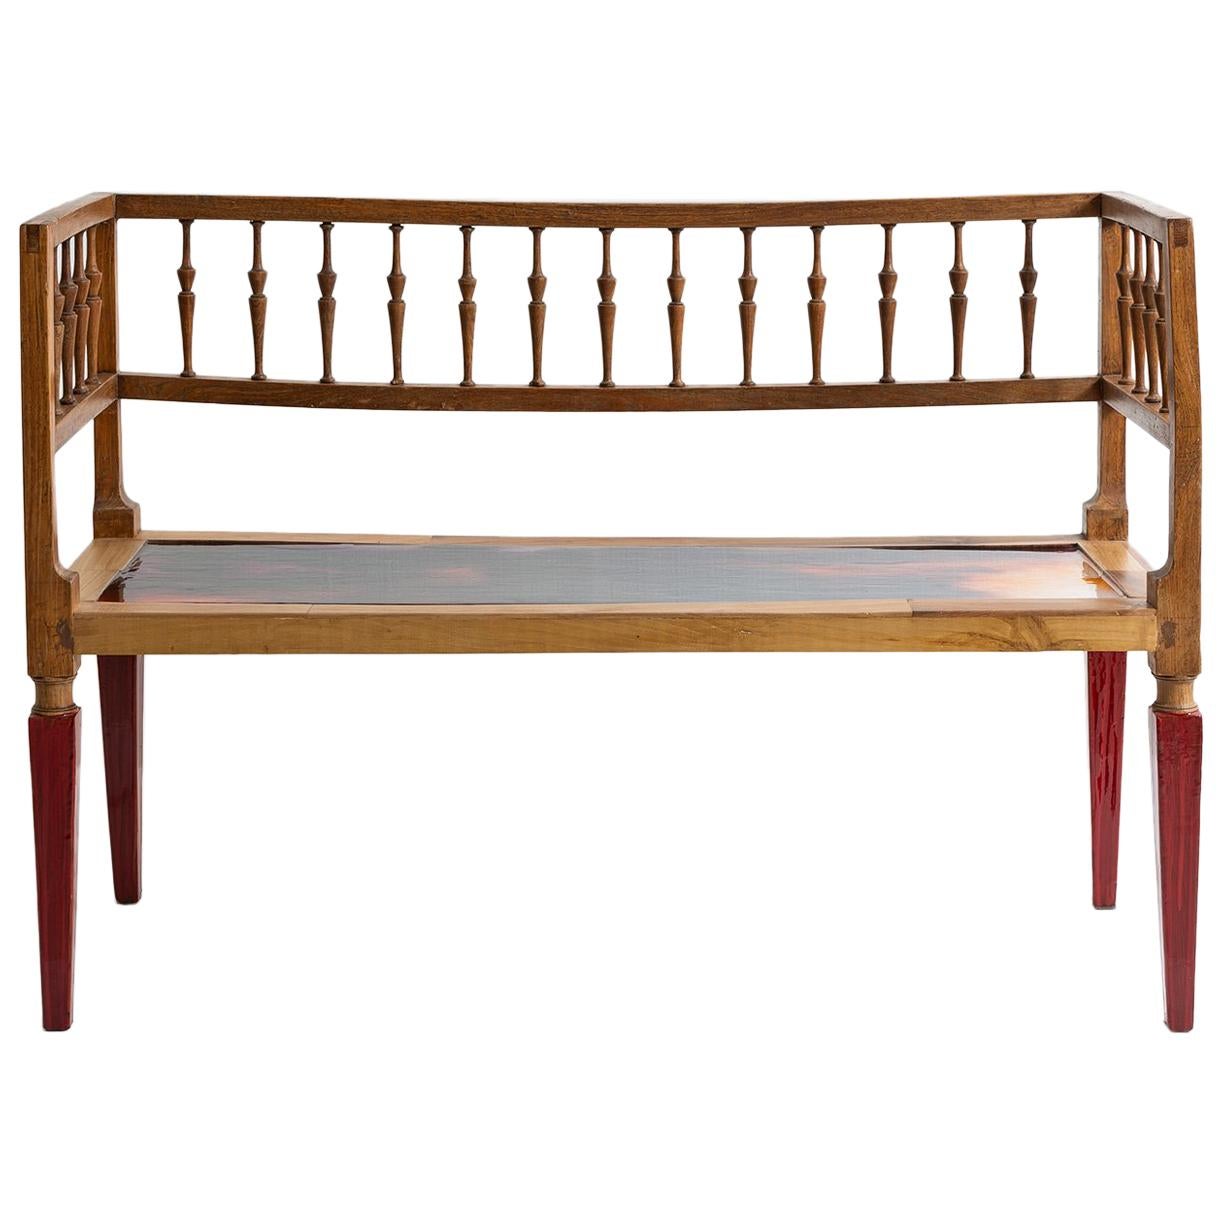 Liquid Color Bench in Elm Wood with Colored Resin Seat by Hillsideout For Sale